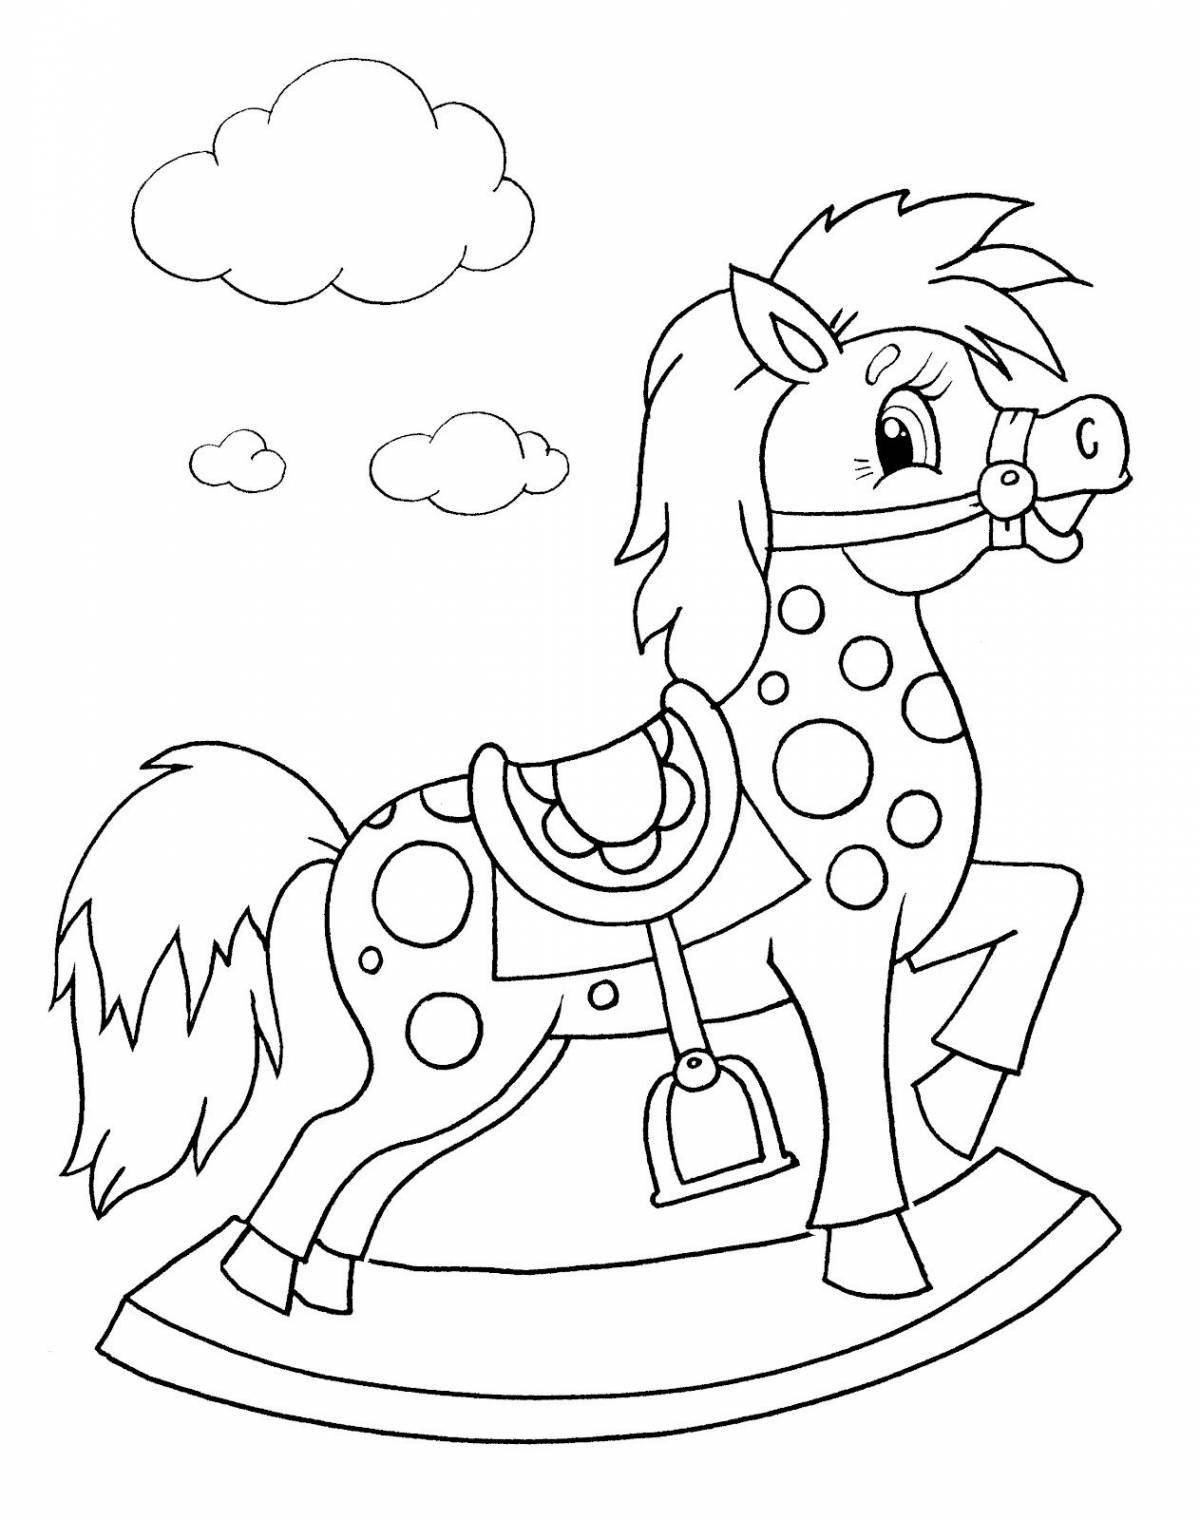 Creative coloring book for kids 5-6 years old